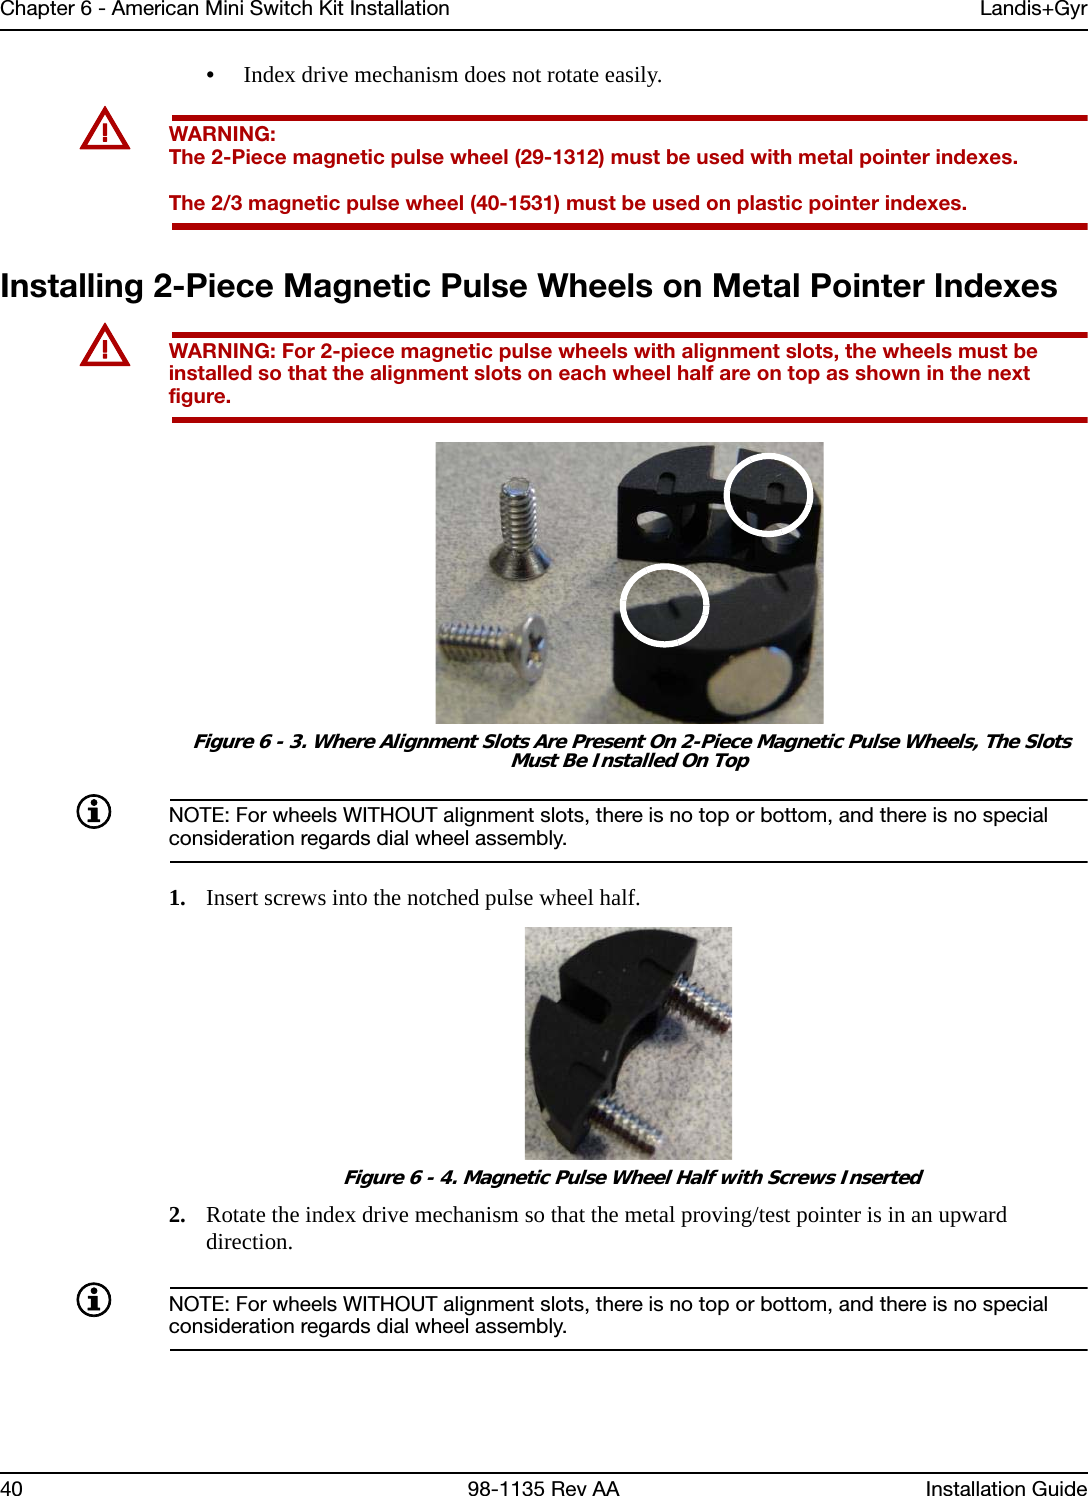 Chapter 6 - American Mini Switch Kit Installation Landis+Gyr40 98-1135 Rev AA Installation Guide•Index drive mechanism does not rotate easily.UWARNING: The 2-Piece magnetic pulse wheel (29-1312) must be used with metal pointer indexes. The 2/3 magnetic pulse wheel (40-1531) must be used on plastic pointer indexes.Installing 2-Piece Magnetic Pulse Wheels on Metal Pointer IndexesUWARNING: For 2-piece magnetic pulse wheels with alignment slots, the wheels must be installed so that the alignment slots on each wheel half are on top as shown in the next figure. Figure 6 - 3. Where Alignment Slots Are Present On 2-Piece Magnetic Pulse Wheels, The Slots Must Be Installed On TopNOTE: For wheels WITHOUT alignment slots, there is no top or bottom, and there is no special consideration regards dial wheel assembly. 1. Insert screws into the notched pulse wheel half. Figure 6 - 4. Magnetic Pulse Wheel Half with Screws Inserted2. Rotate the index drive mechanism so that the metal proving/test pointer is in an upward direction. NOTE: For wheels WITHOUT alignment slots, there is no top or bottom, and there is no special consideration regards dial wheel assembly. 